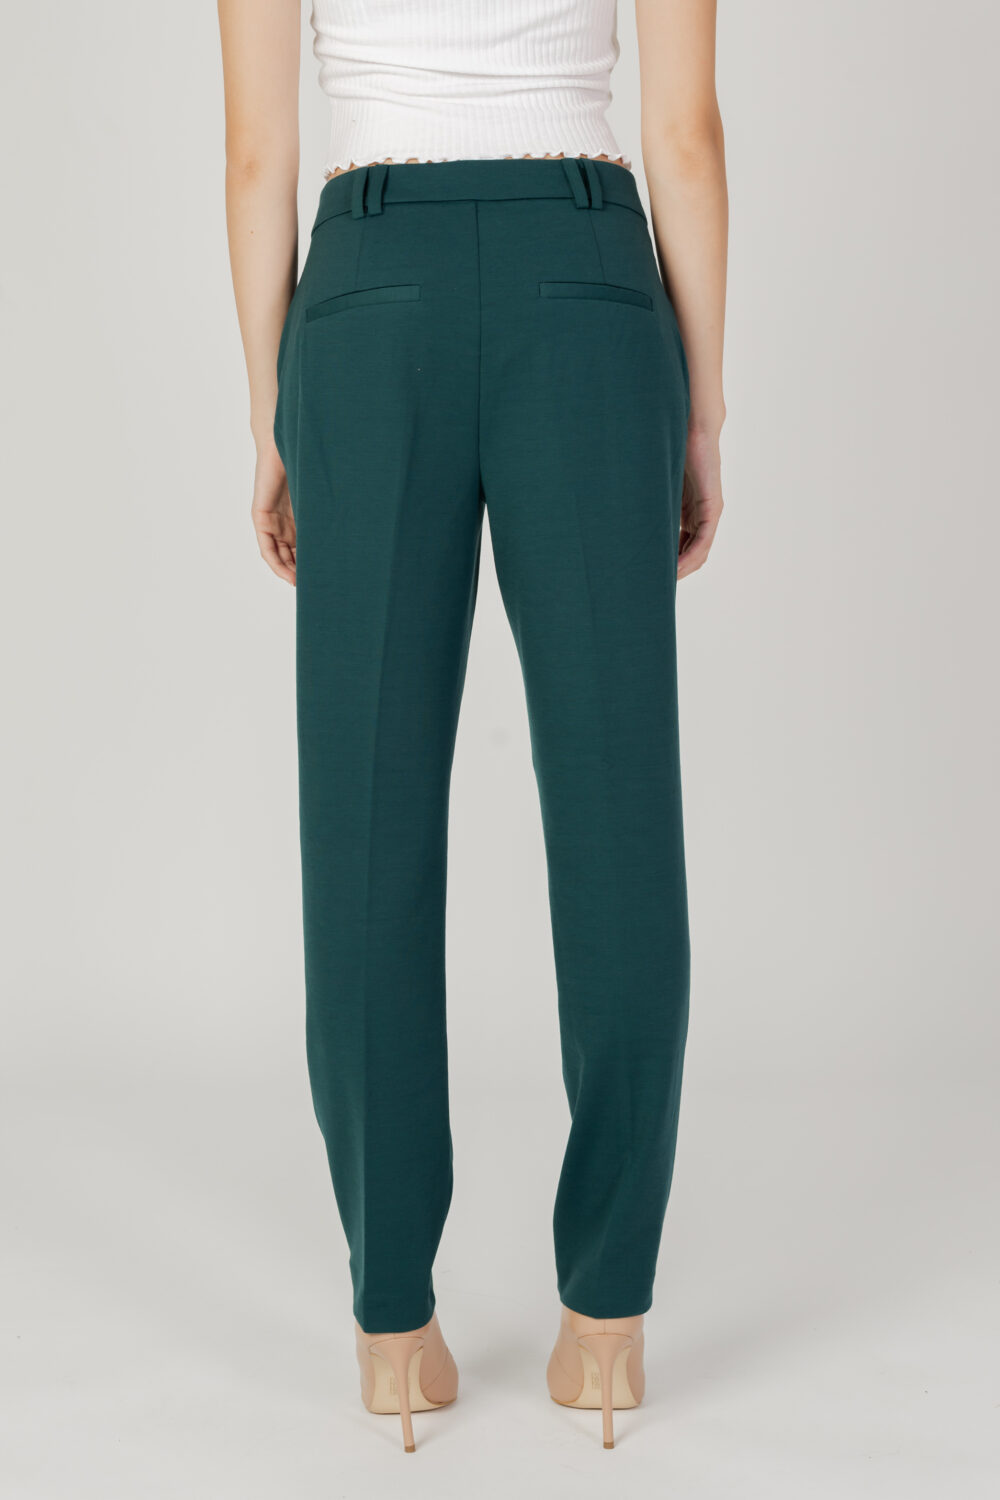 Pantaloni a sigaretta Only onlpeach mw cigarette ank pant tlr noos Verde - Foto 4